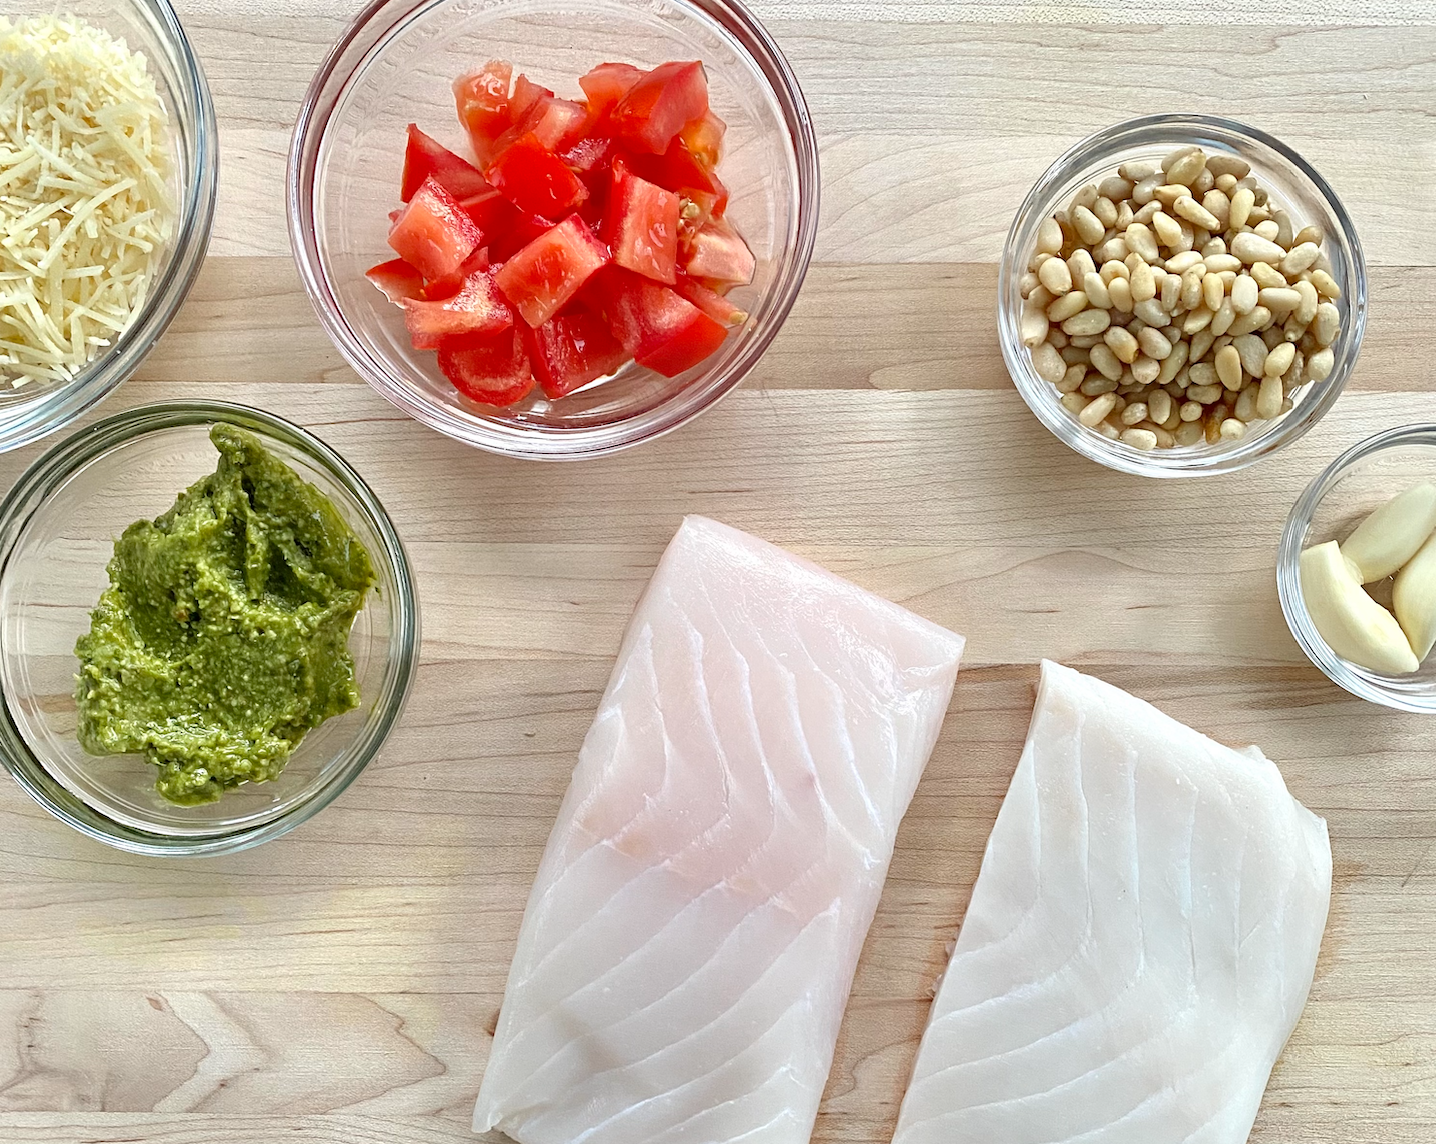 Pescatarian Diet Guide and Meal Plan: What to Eat